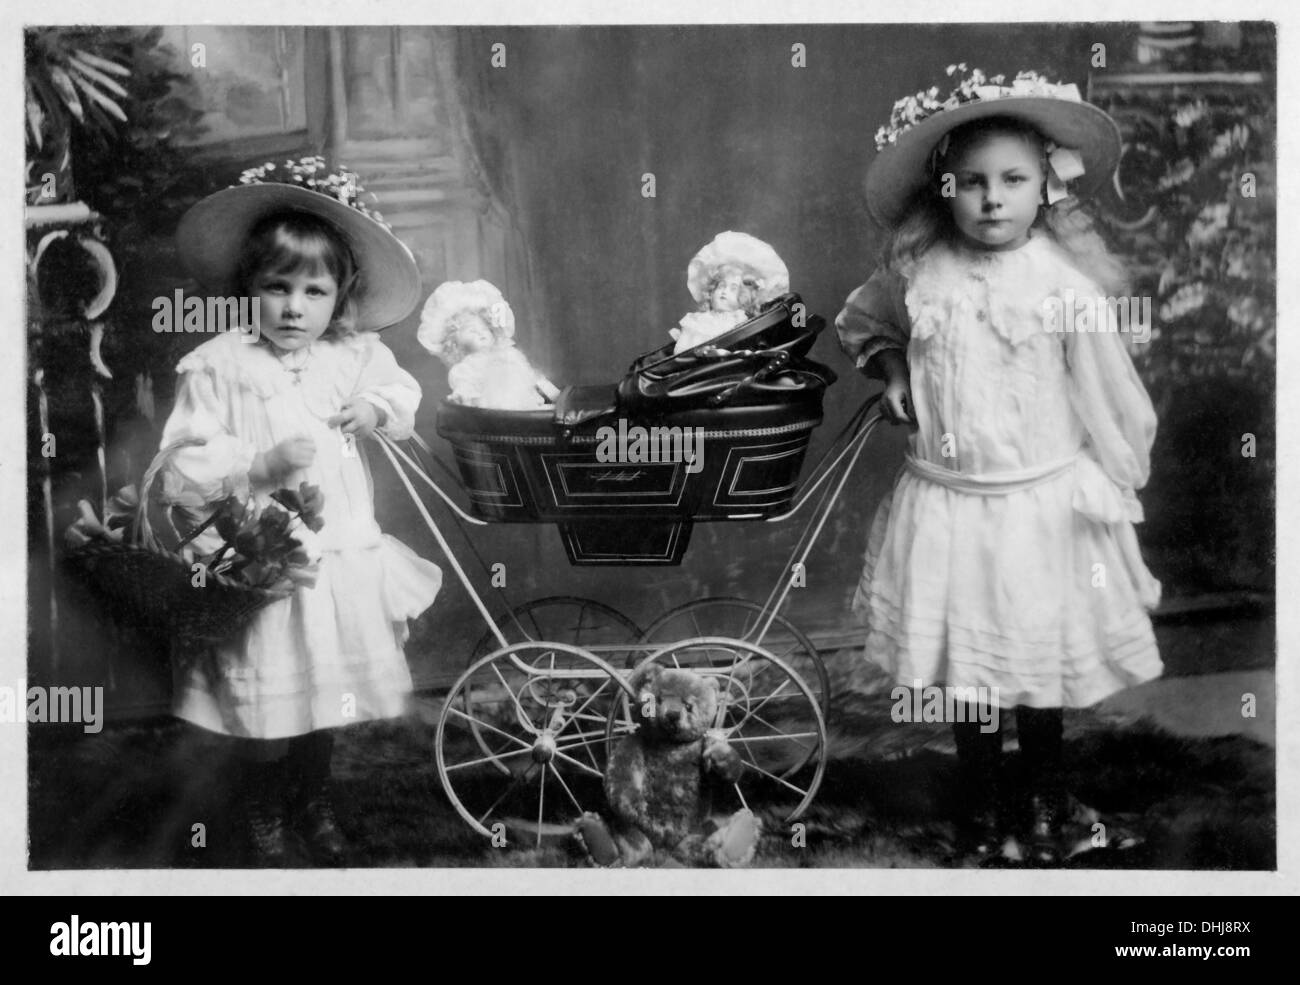 two victorian girls with pram and dolls - Historical Stock Photo